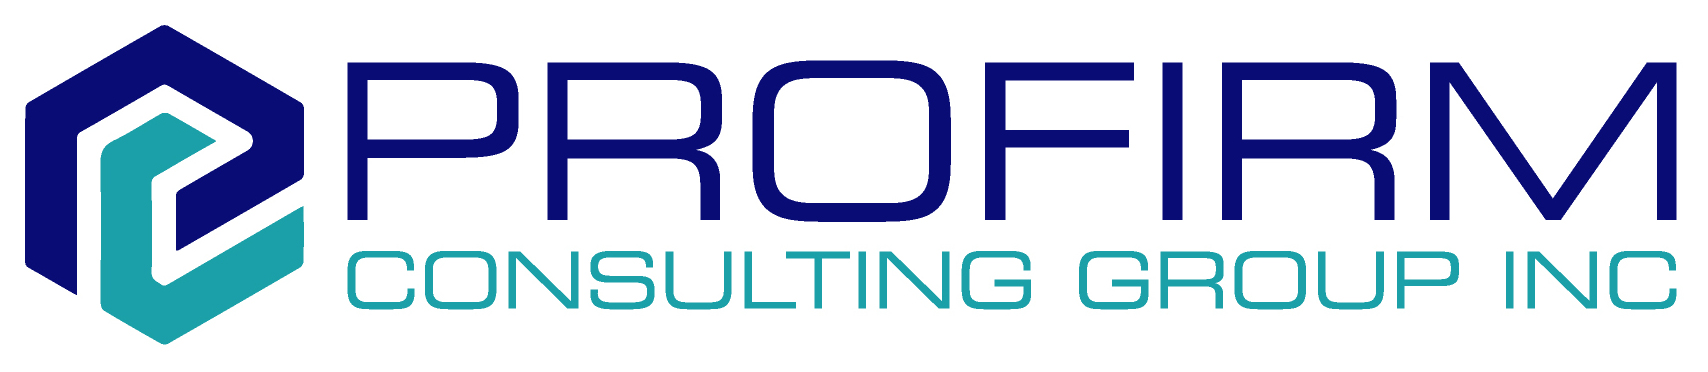 Profirm Consulting Group Inc is a global management consulting firm that uses deep industry expertise and rigorous analysis to help business leaders achieve practical results with real impact.